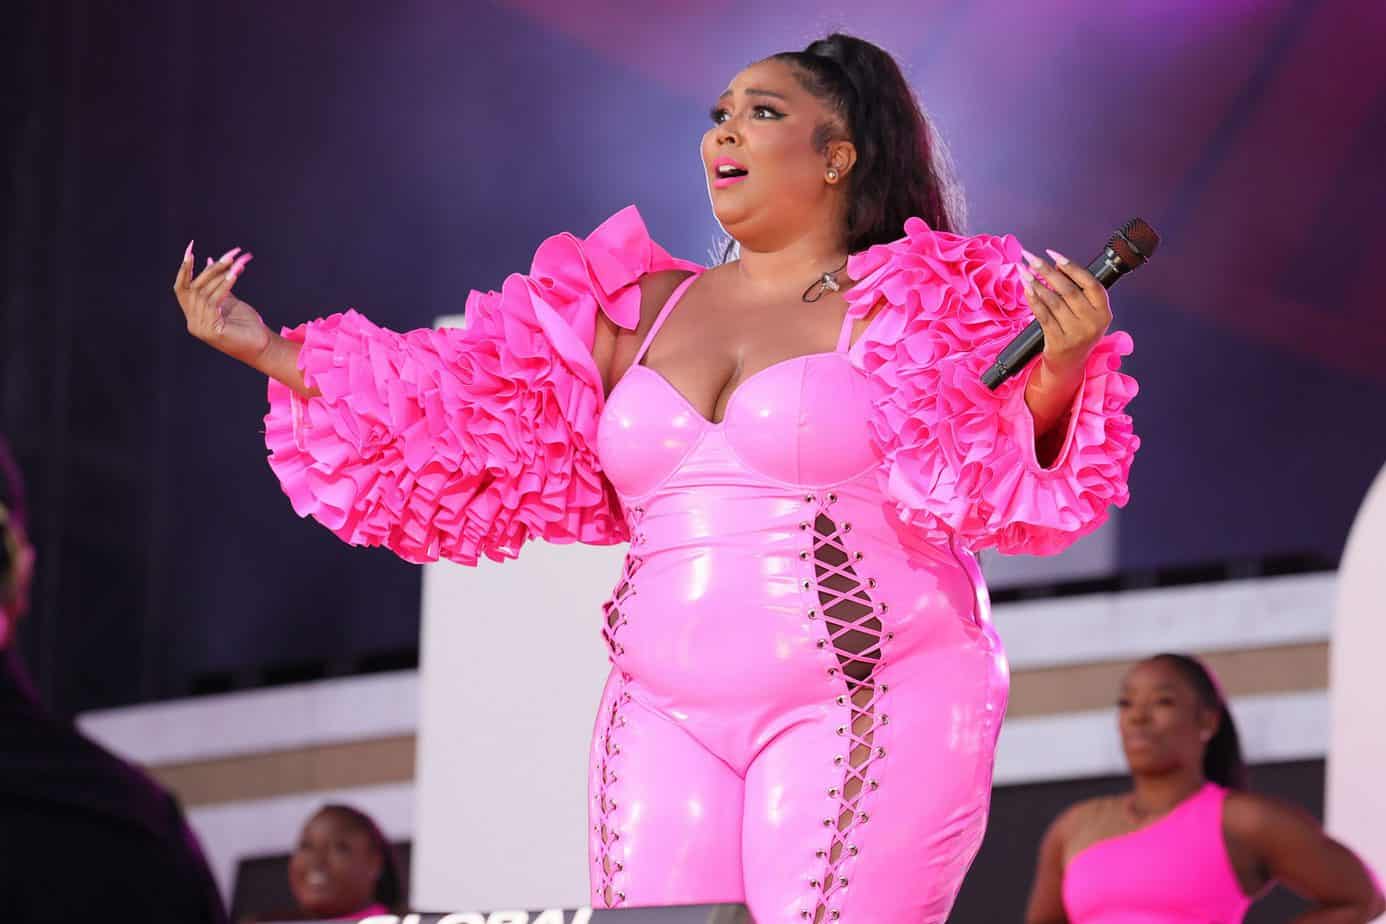 Lizzo Says Going Viral Does Not Equal Having A Successful Song